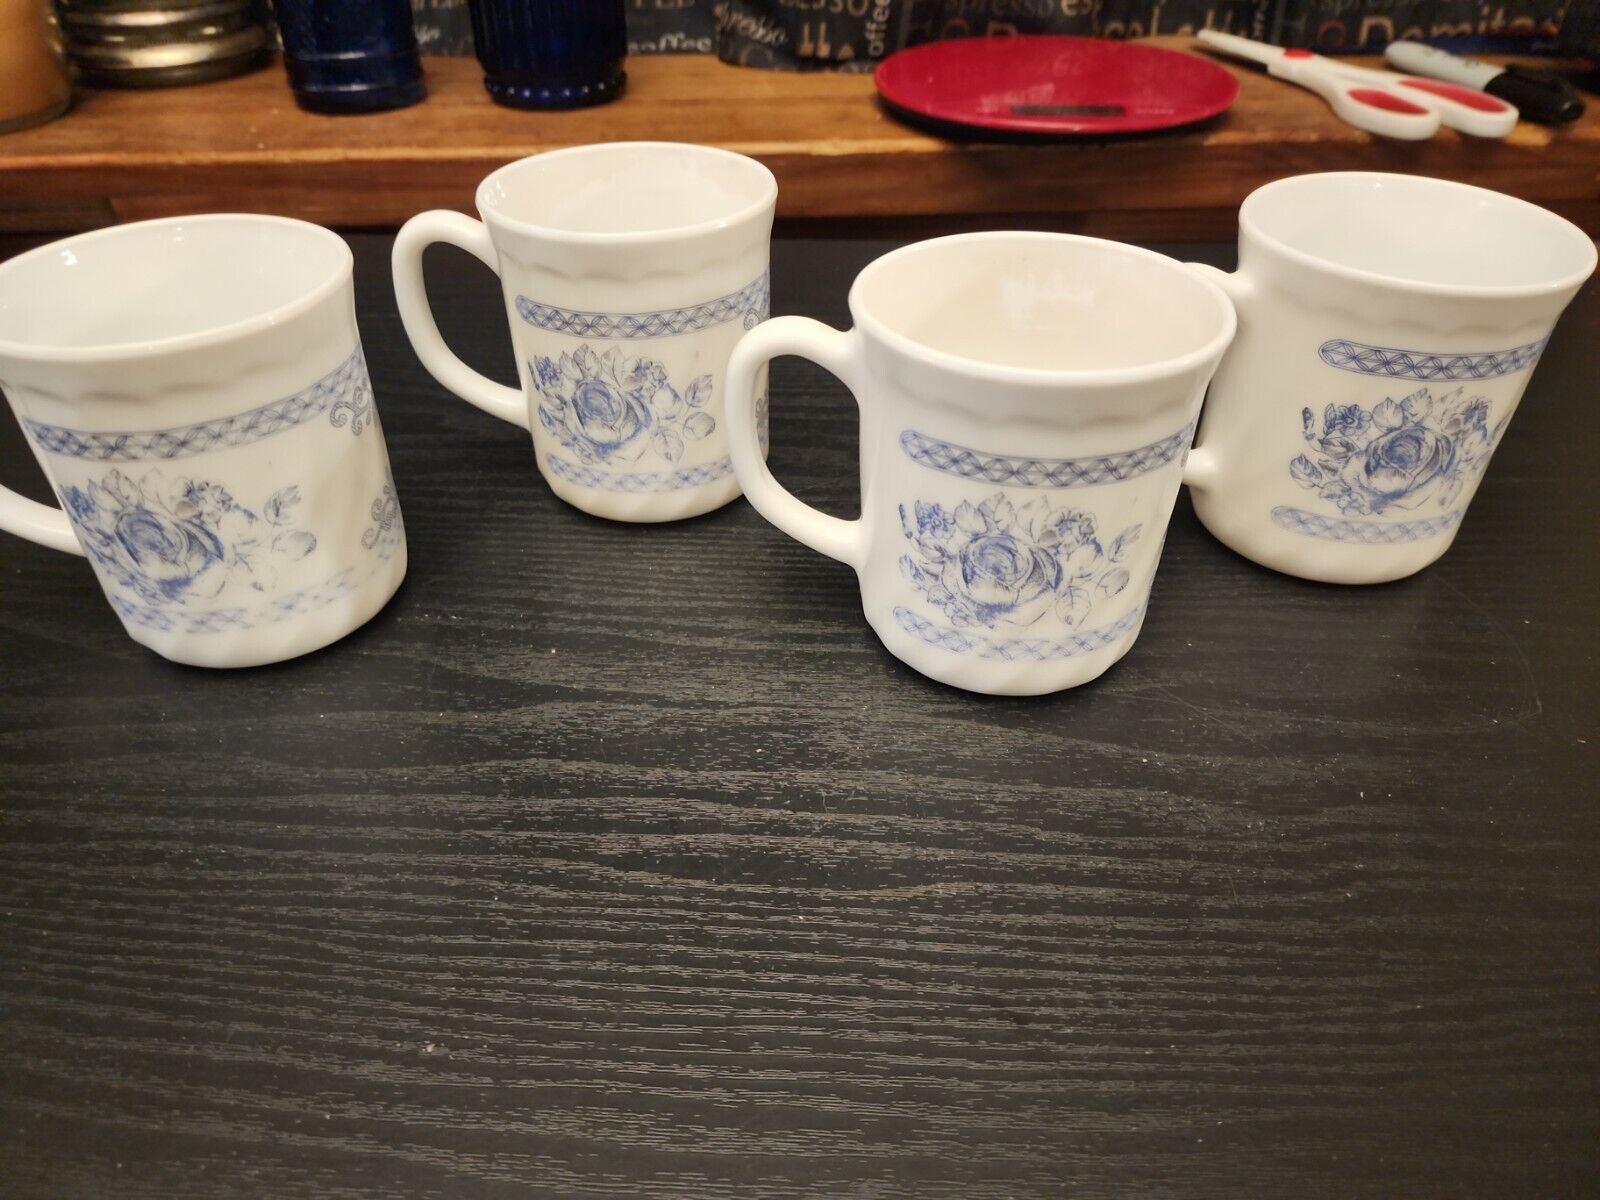 Vintage Arcopal Honorine Mugs White with Blue Floral French Country Set of 4 (3)